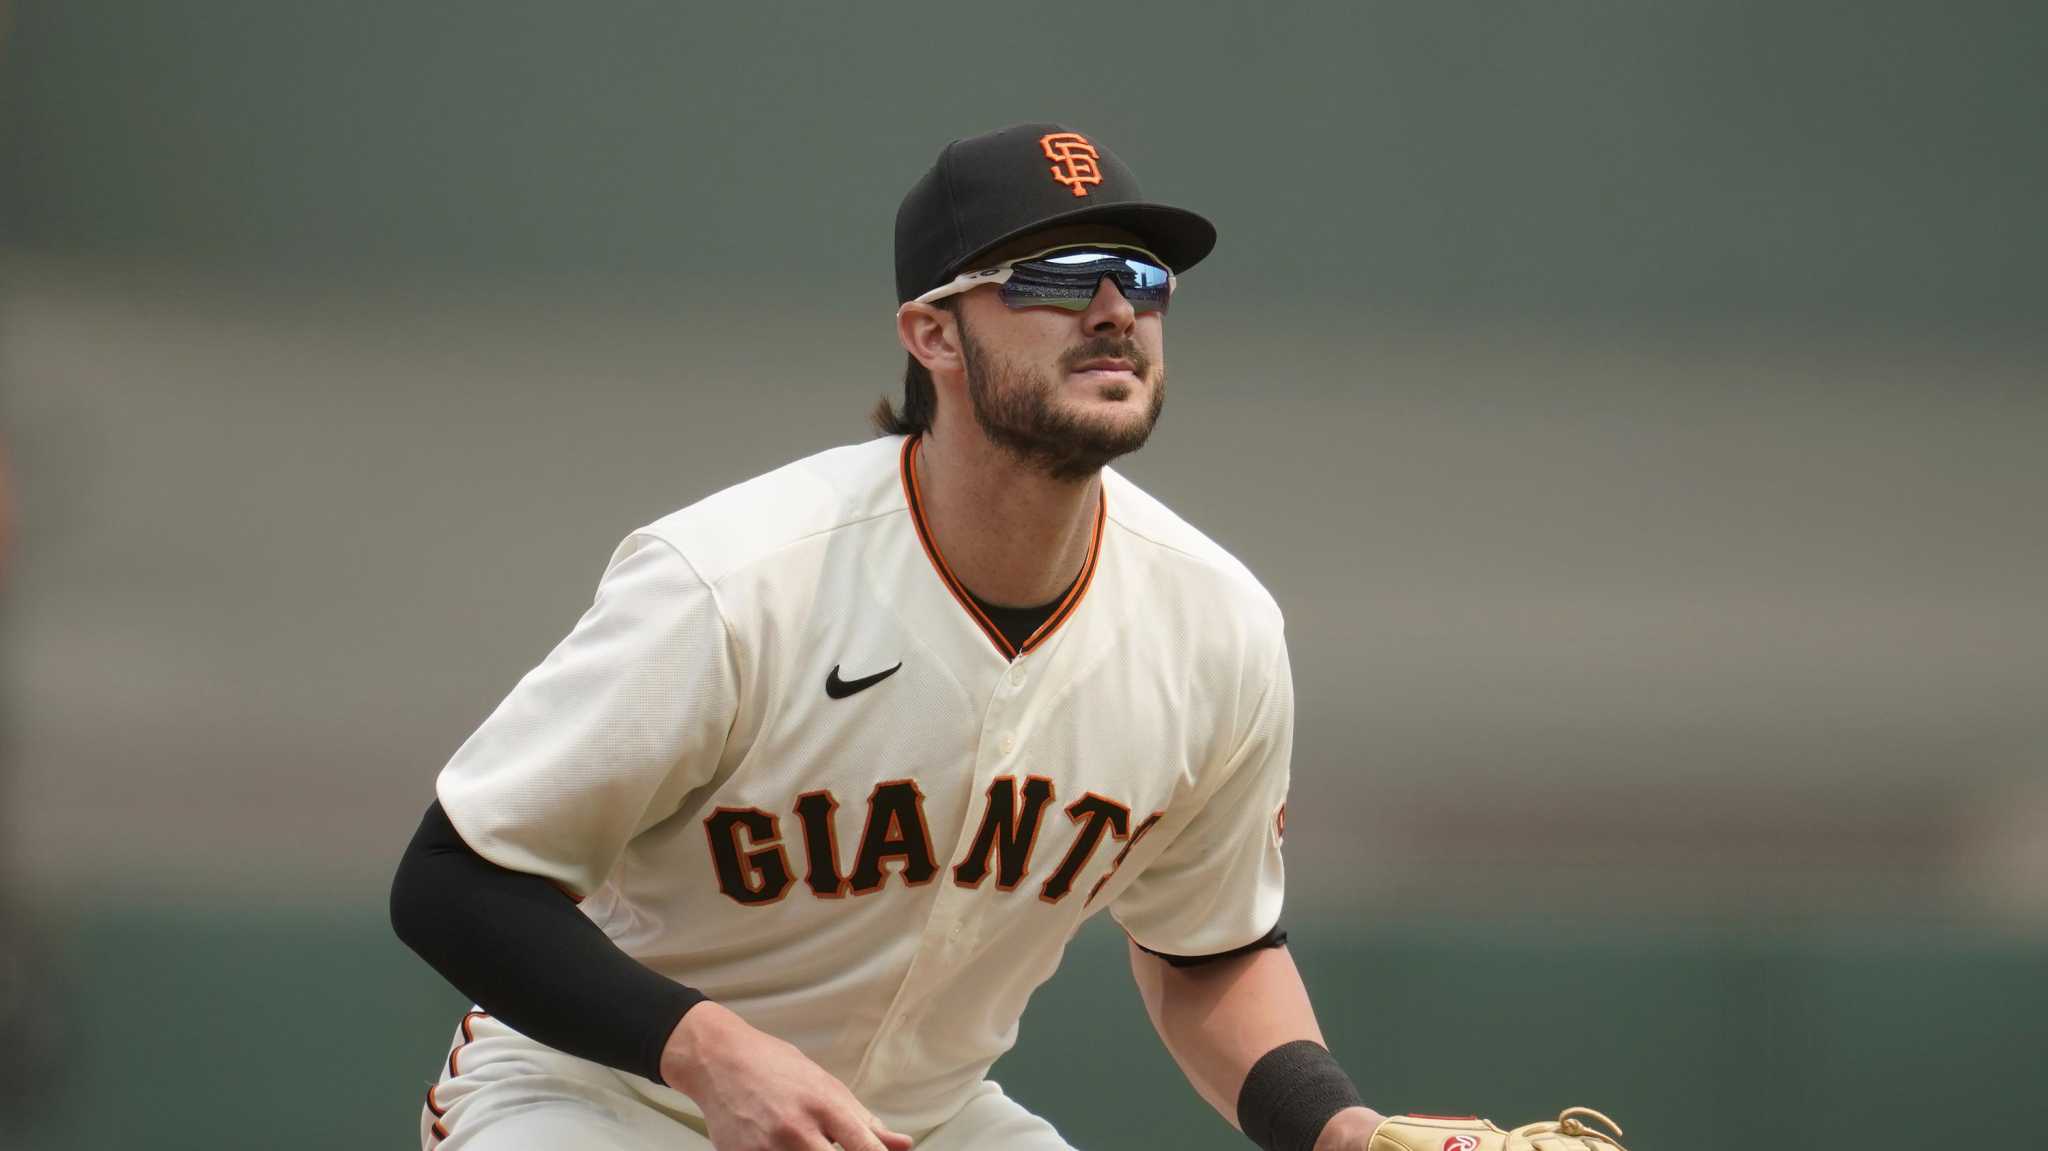 Giants get good news on Kris Bryant MRI results: He'll be good to go